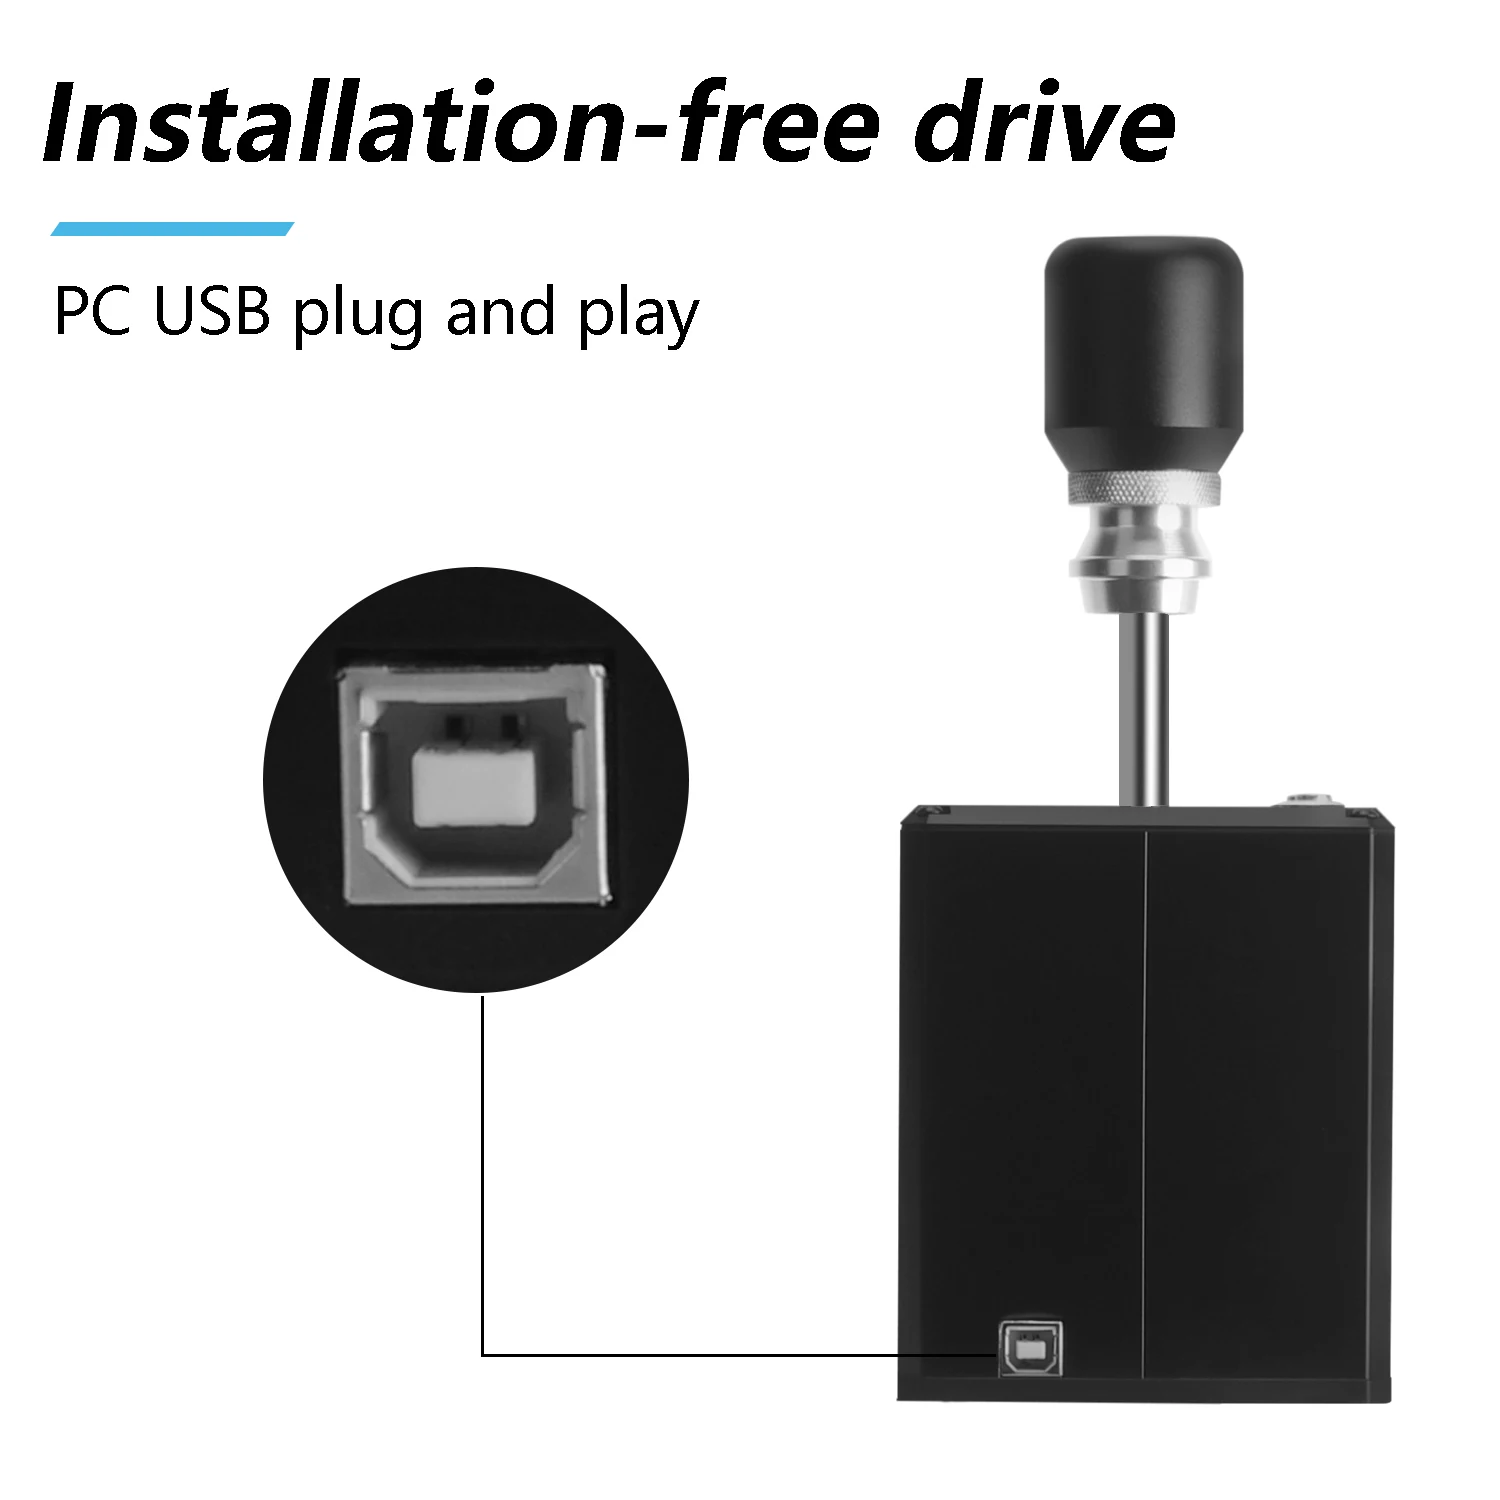 PC USB H Gear Shifter For Logitech G27 G29 G25 G920 For Thrustmaster T300RS/GT For ETS2 Sim Gear Shift PC Racing Game